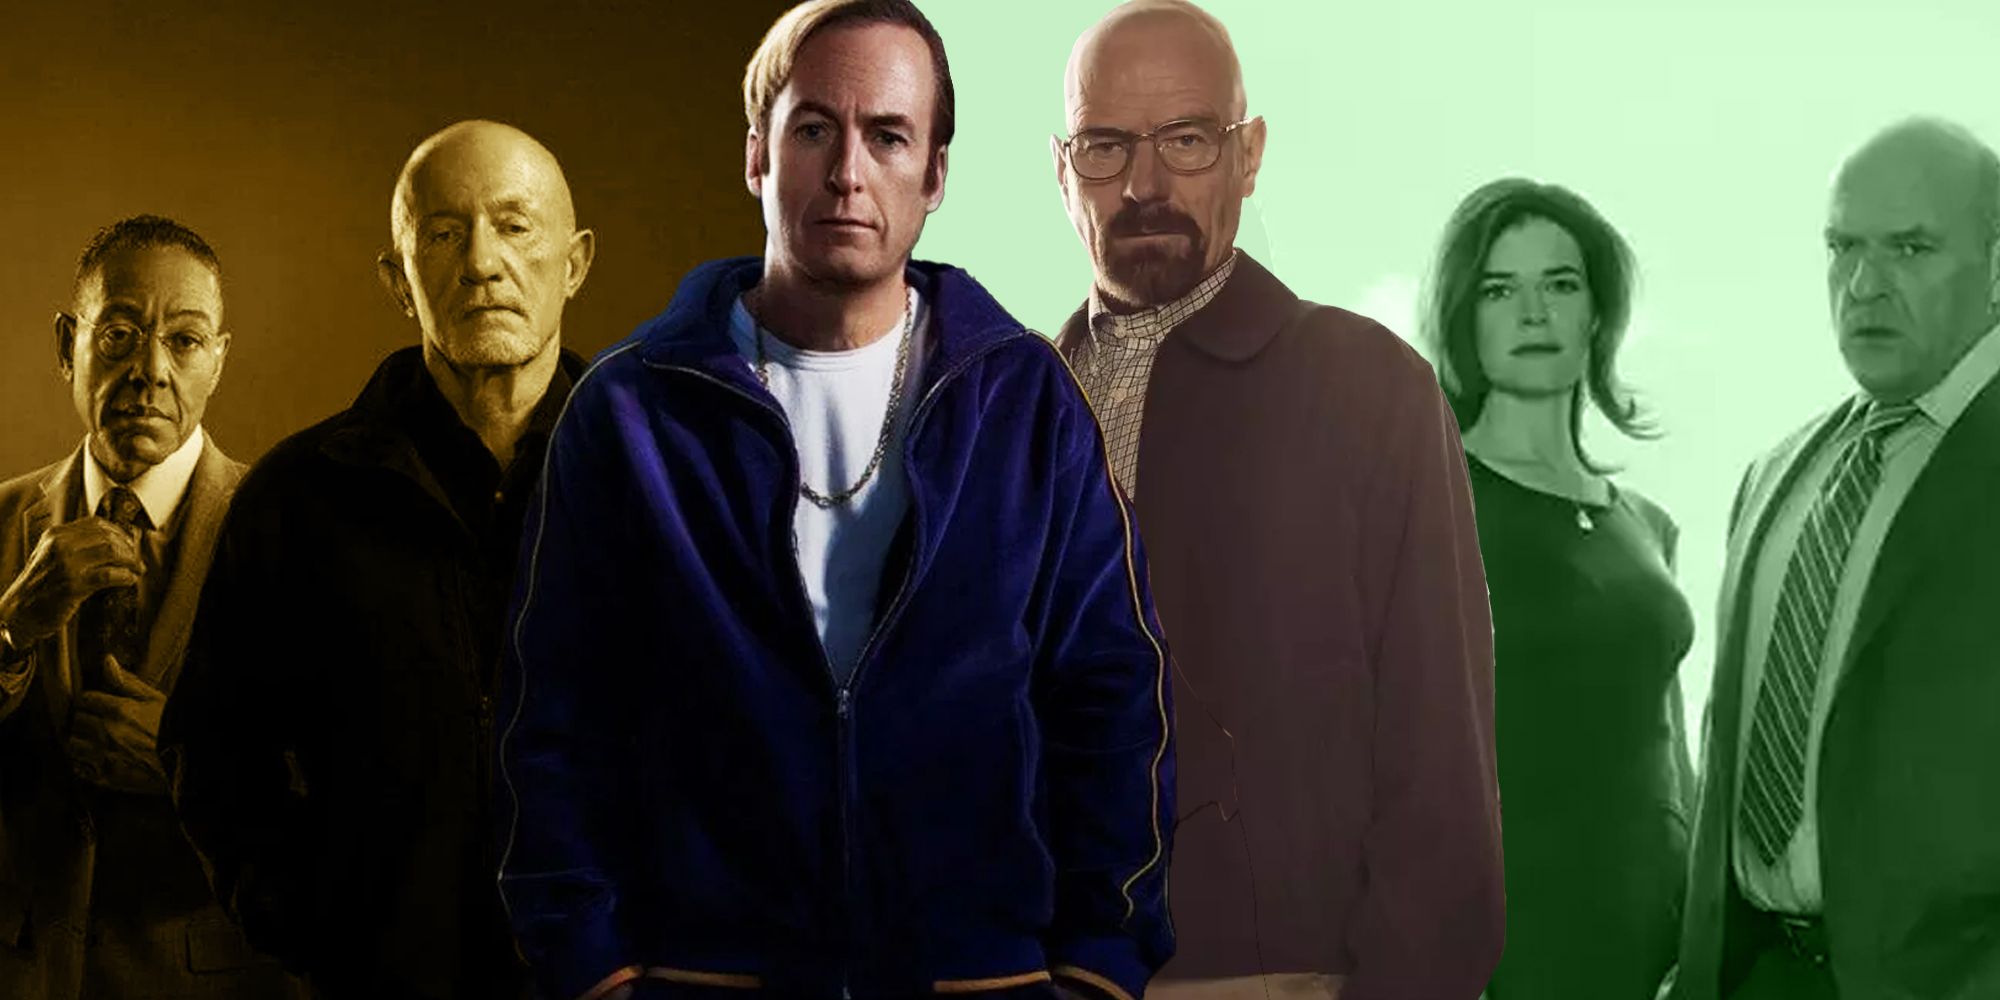 Saul and the cast of Better Call Saul with Walt and the cast of Breaking Bad.